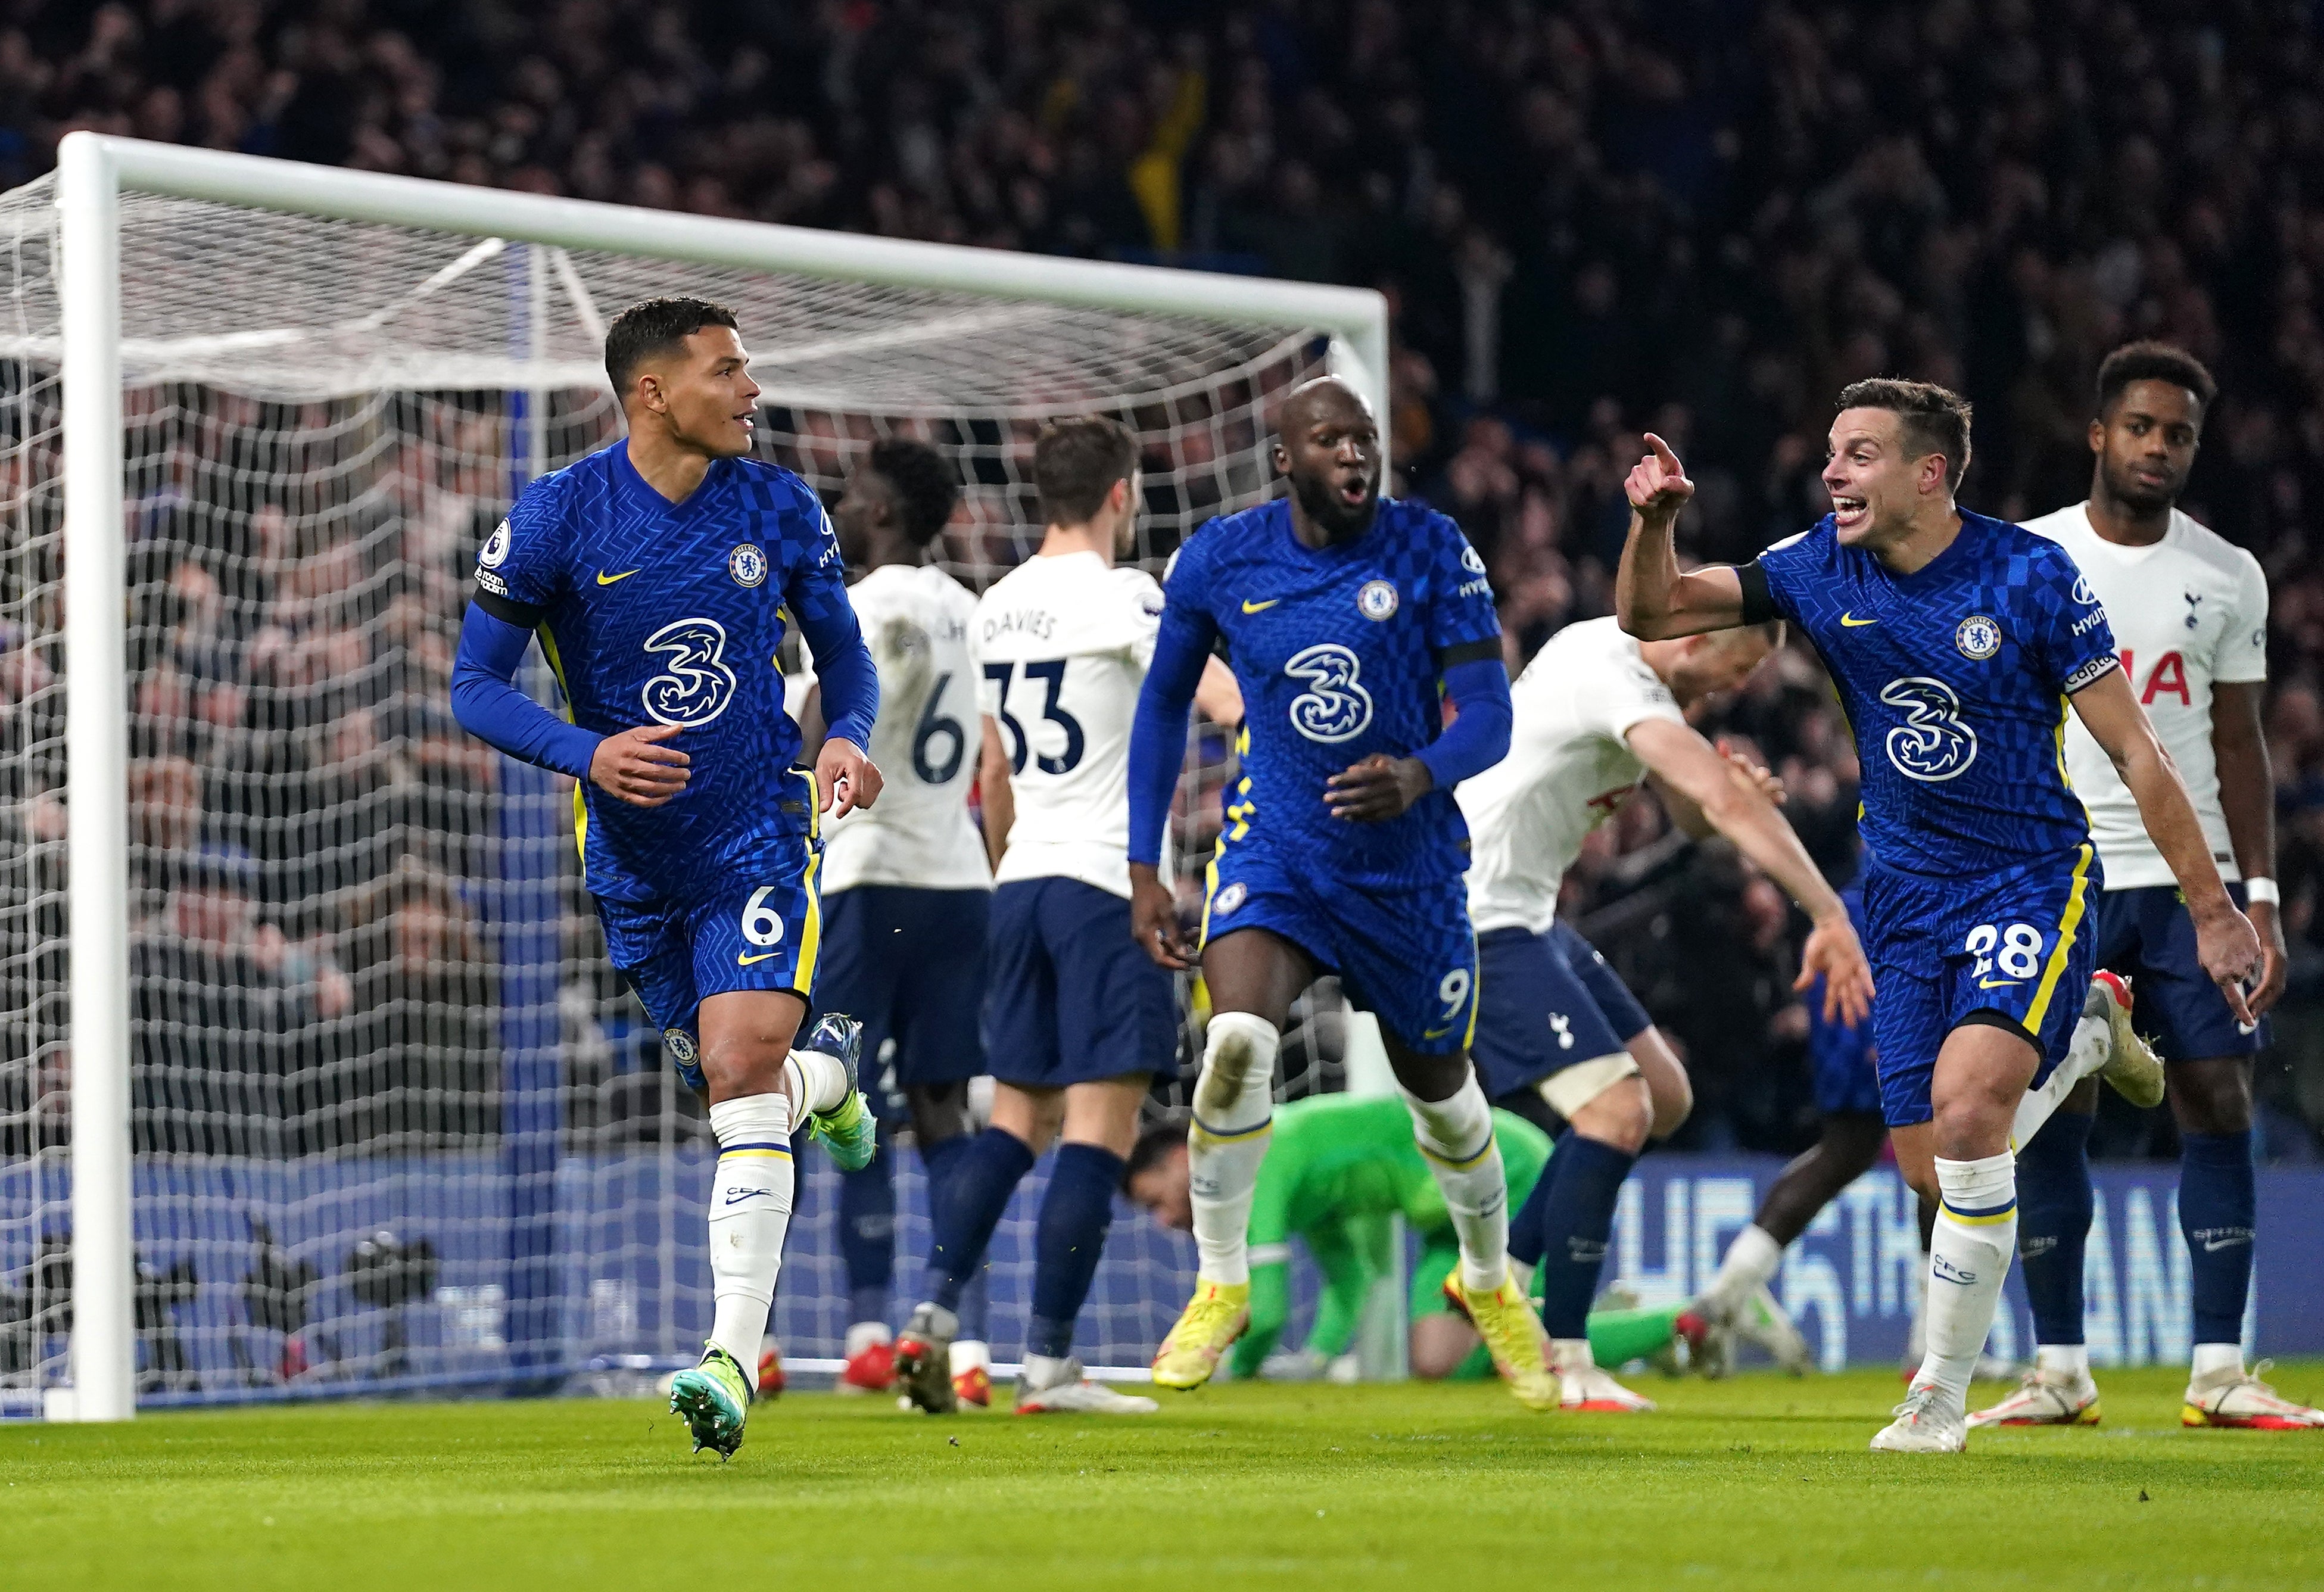 Chelsea FC chase Premier League record as they face Tottenham Hotspur FC